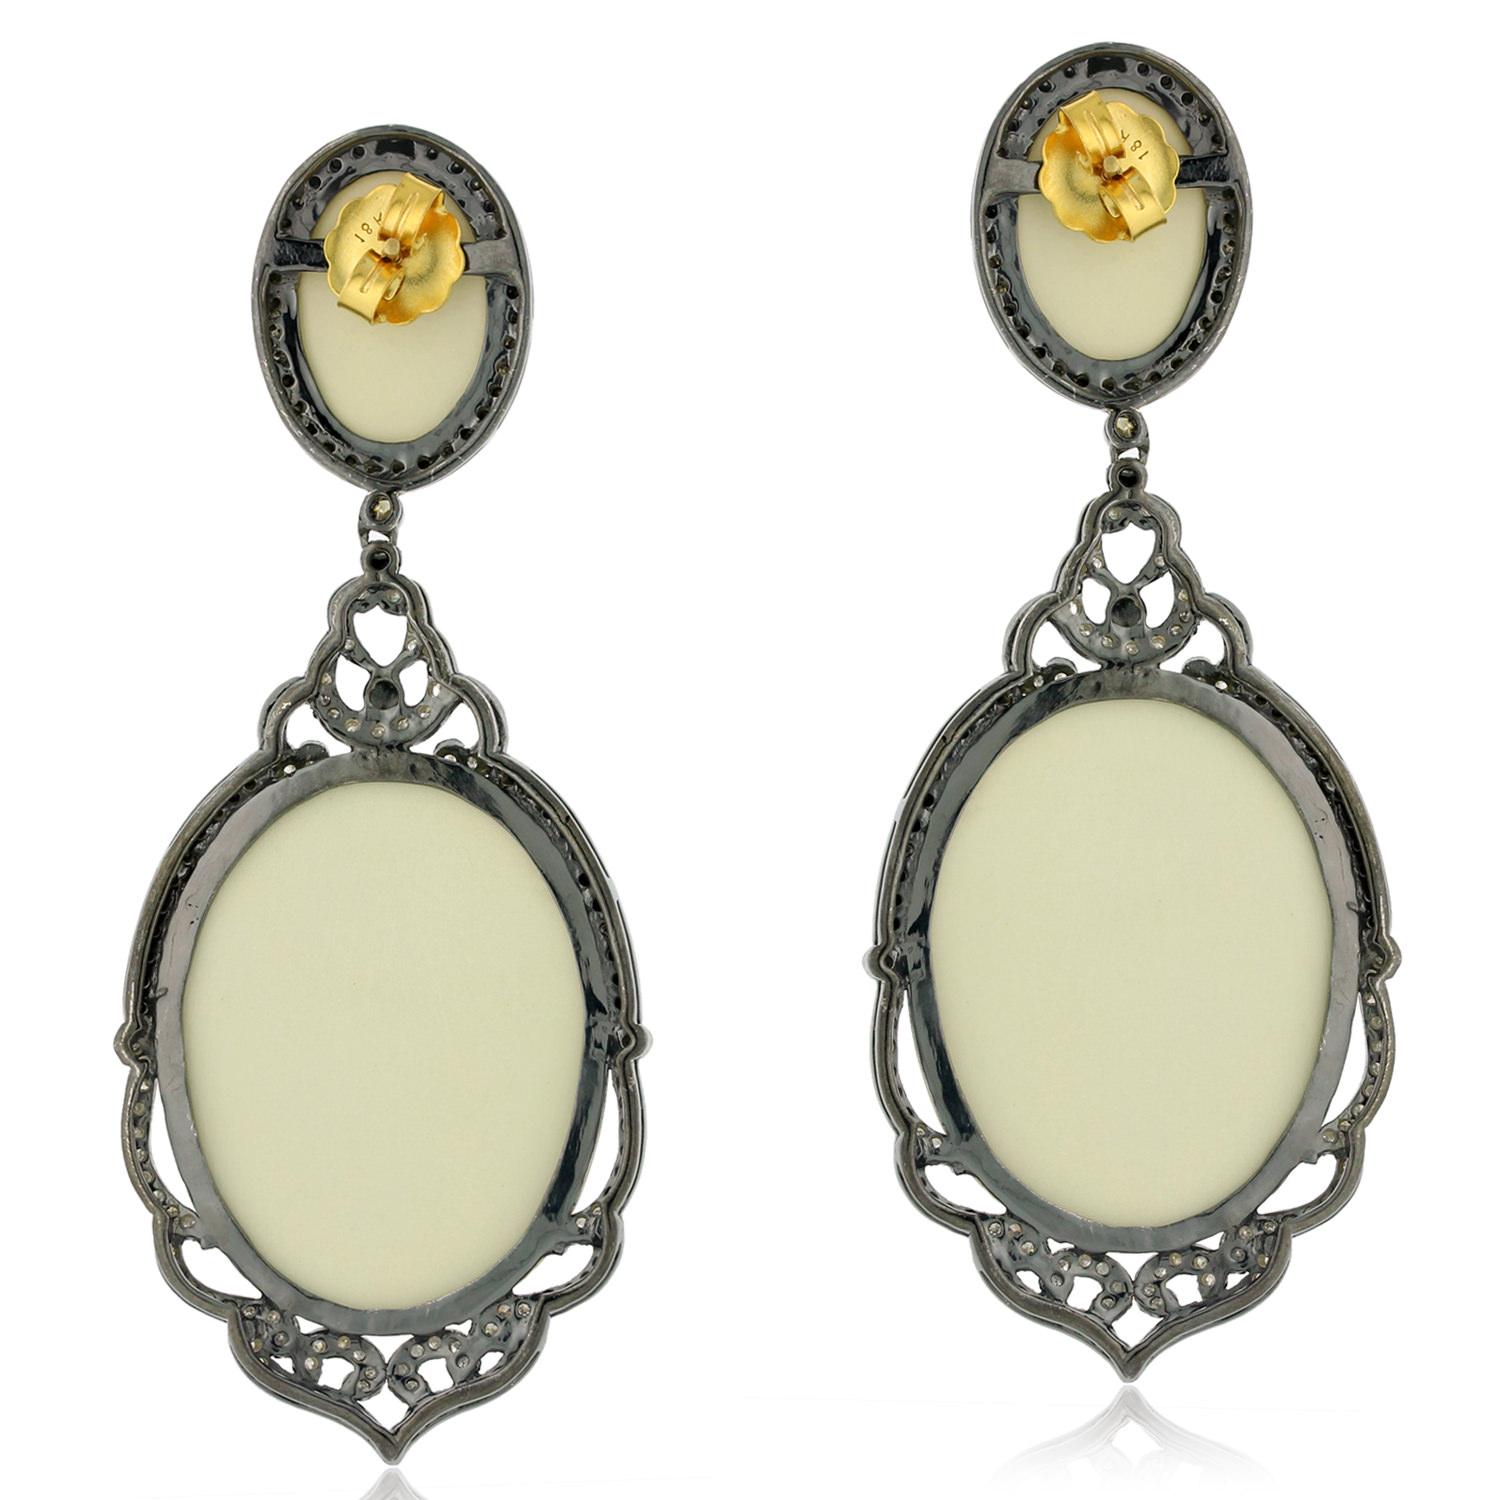 Elevate your style with these exquisite Carved Shell Cameo Earrings, surrounded by Pave Diamonds in 18k Gold & Silver. Perfect for adding a touch of timeless elegance to any outfit, these earrings feature intricate shell cameo carving in a classic